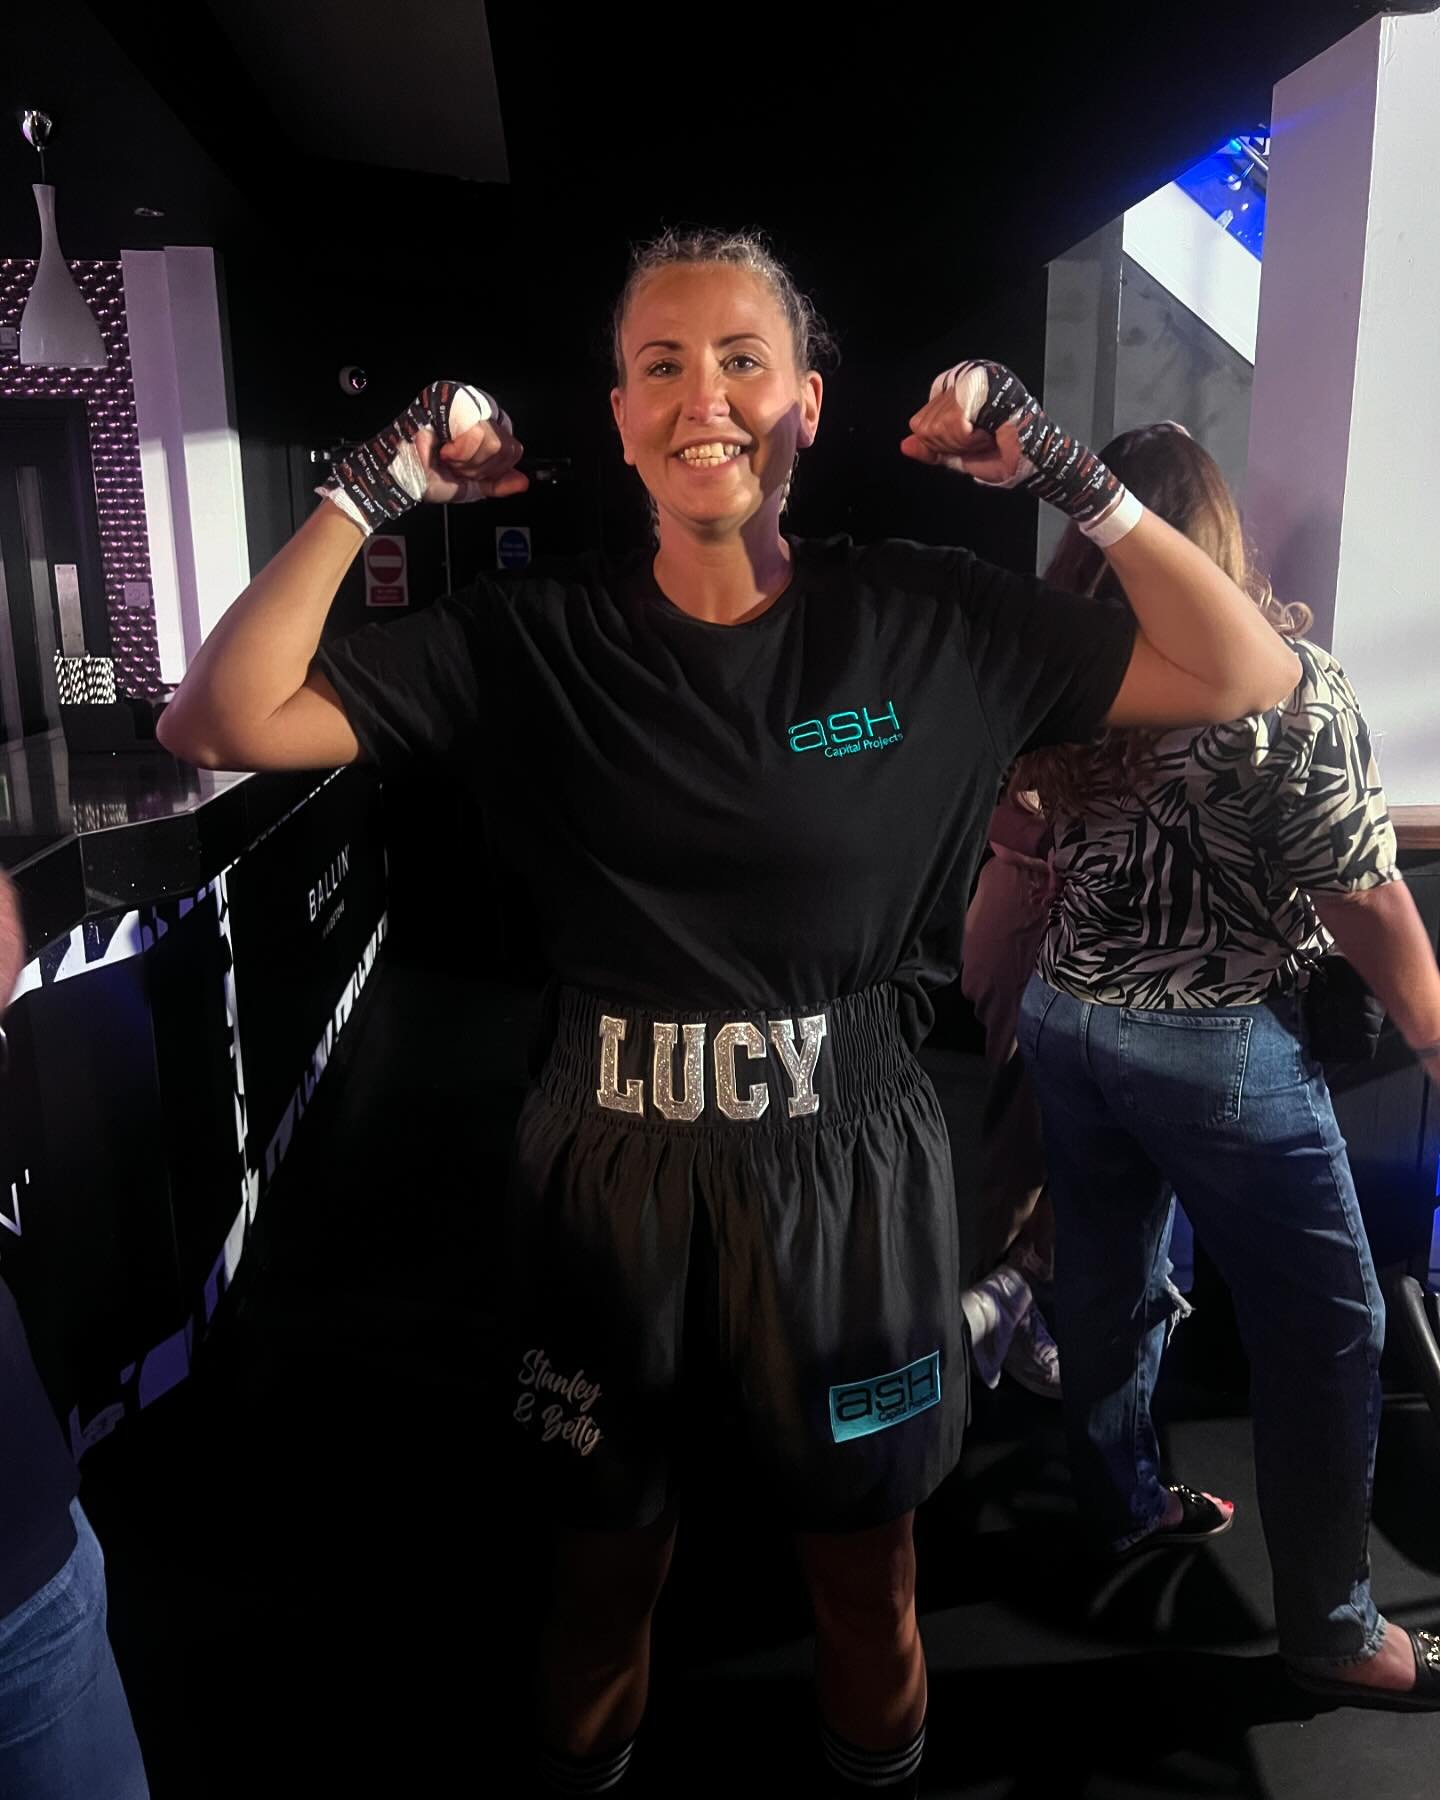 Amazing afternoon yesterday watching our BDM @_____lucy_____0 win a fight at last! All her hardwork over the last few years paying off in 3 impressive rounds. Pleasure to sponsor Lucy. @tkoacademy certainly trained her well!  Who or what will we spon